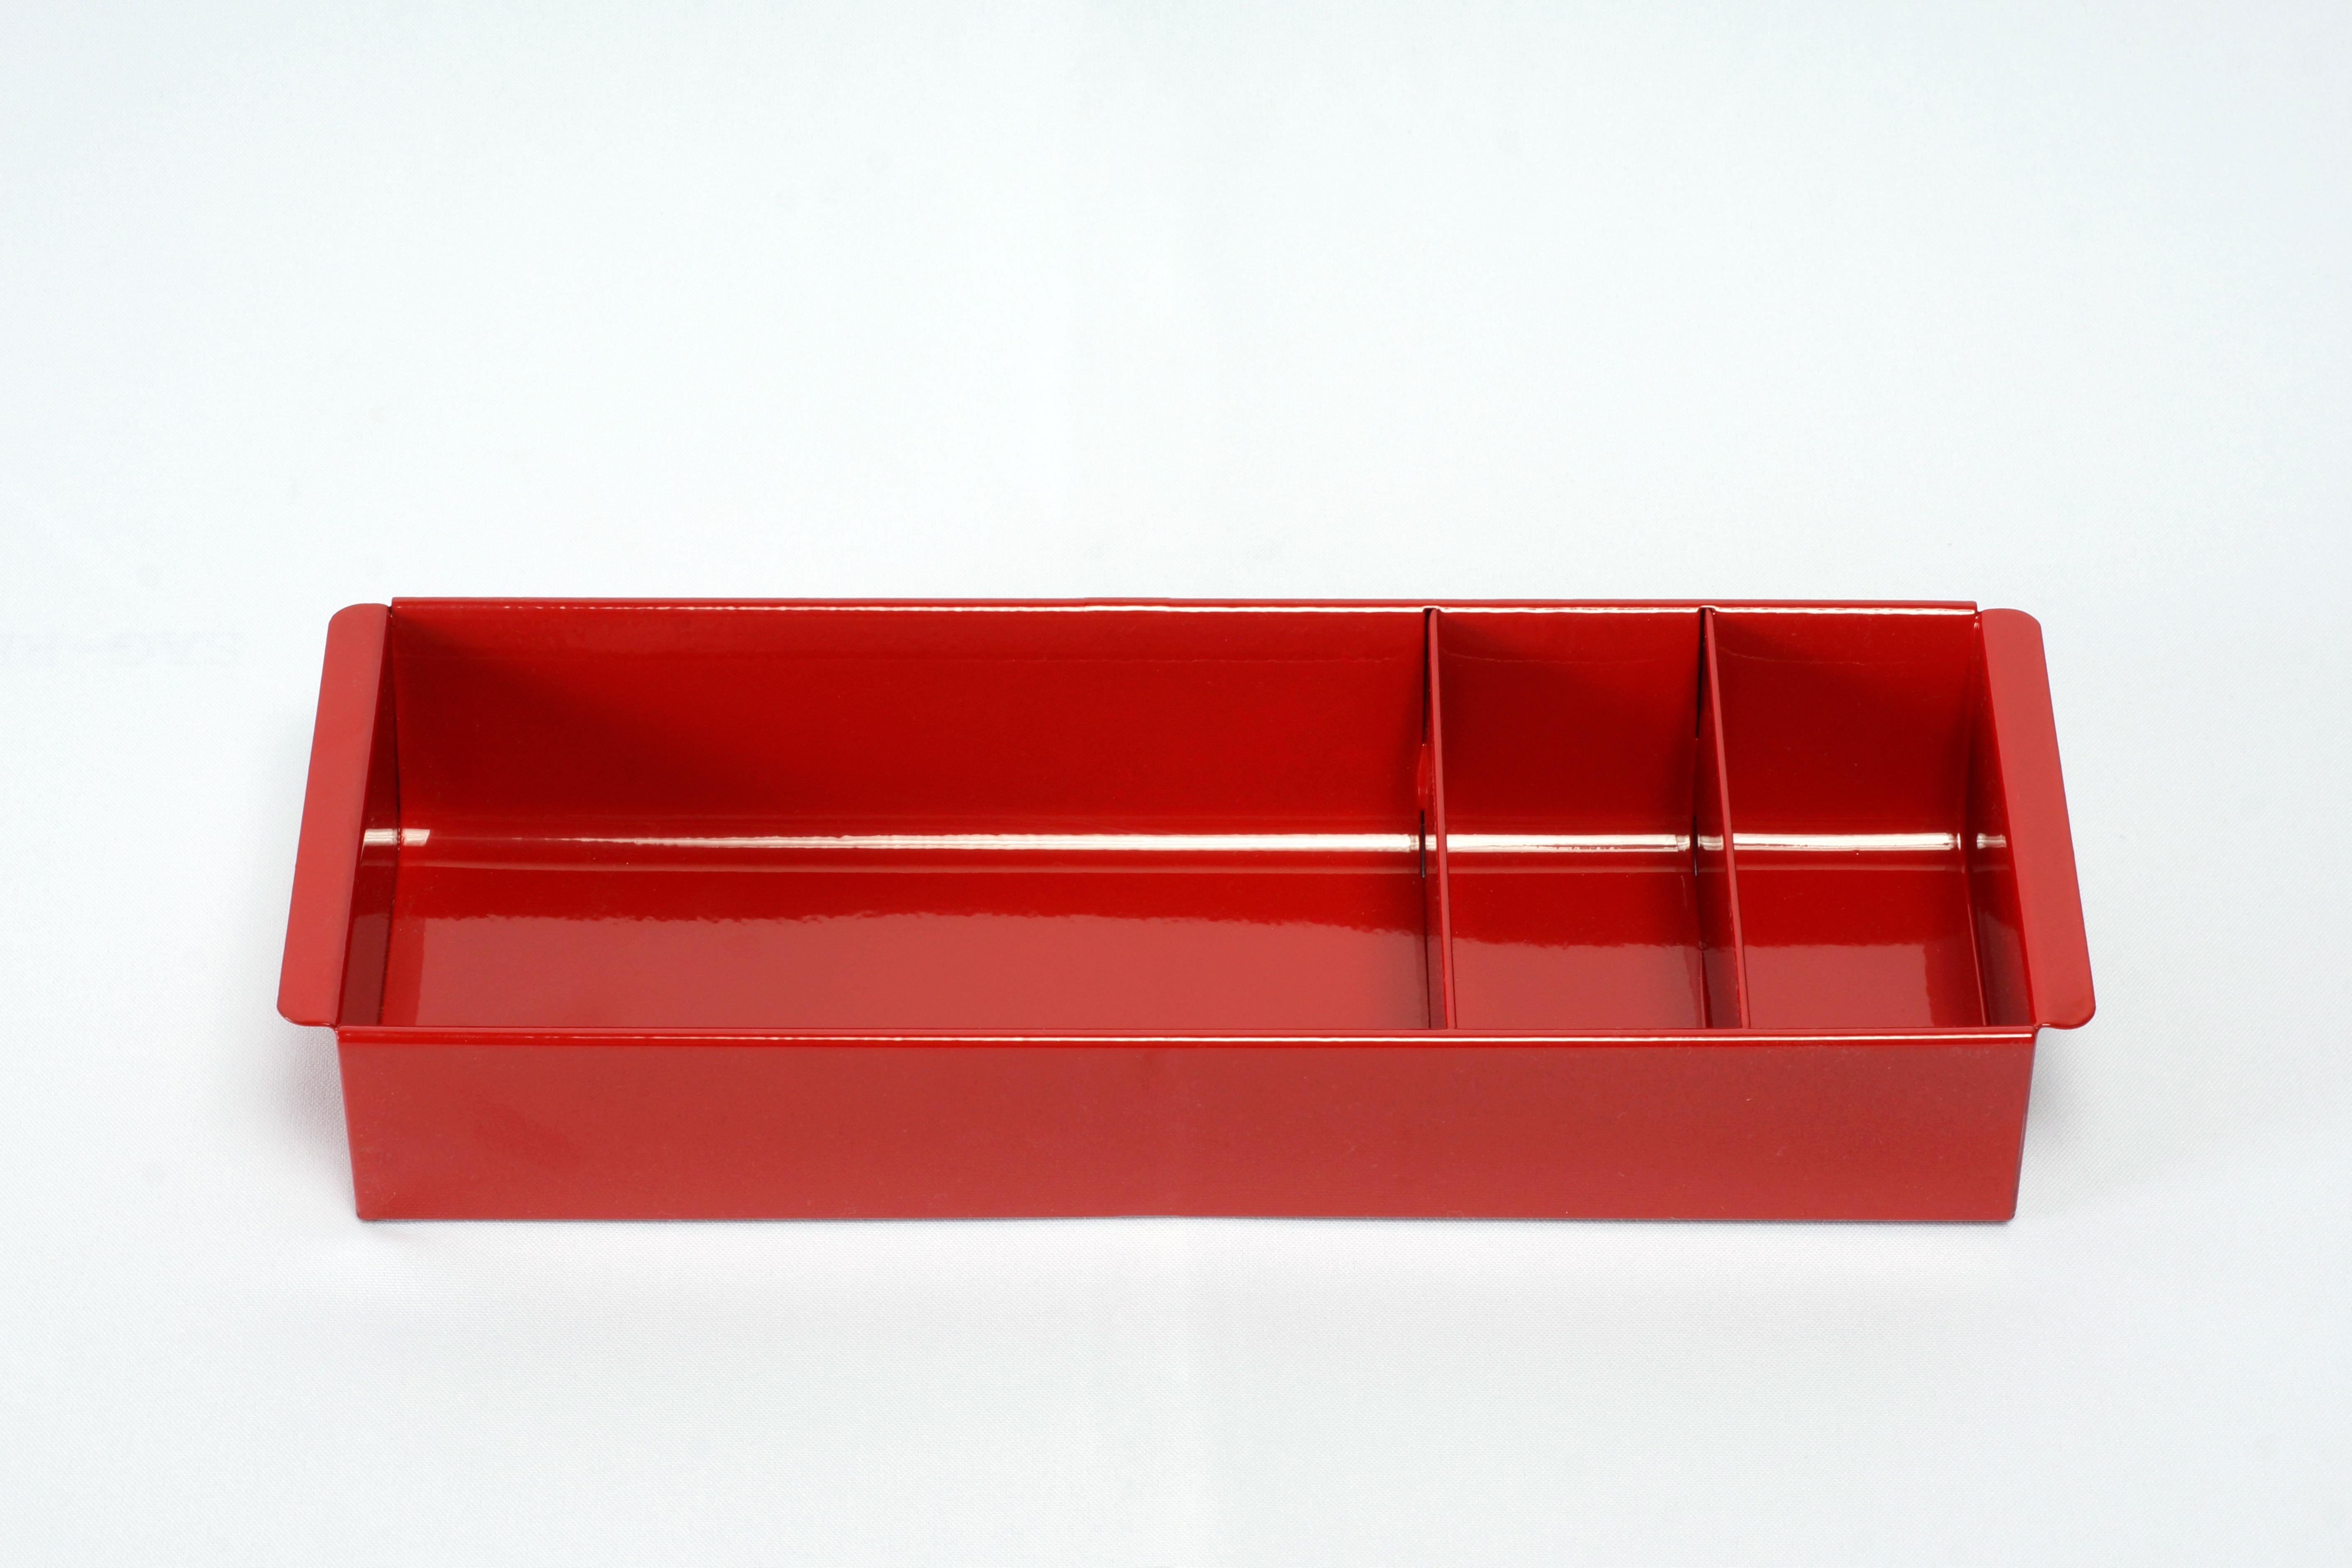 American Steel Tanker Drawer Insert Repurposed as Organizer, Refinished in Ruby Red